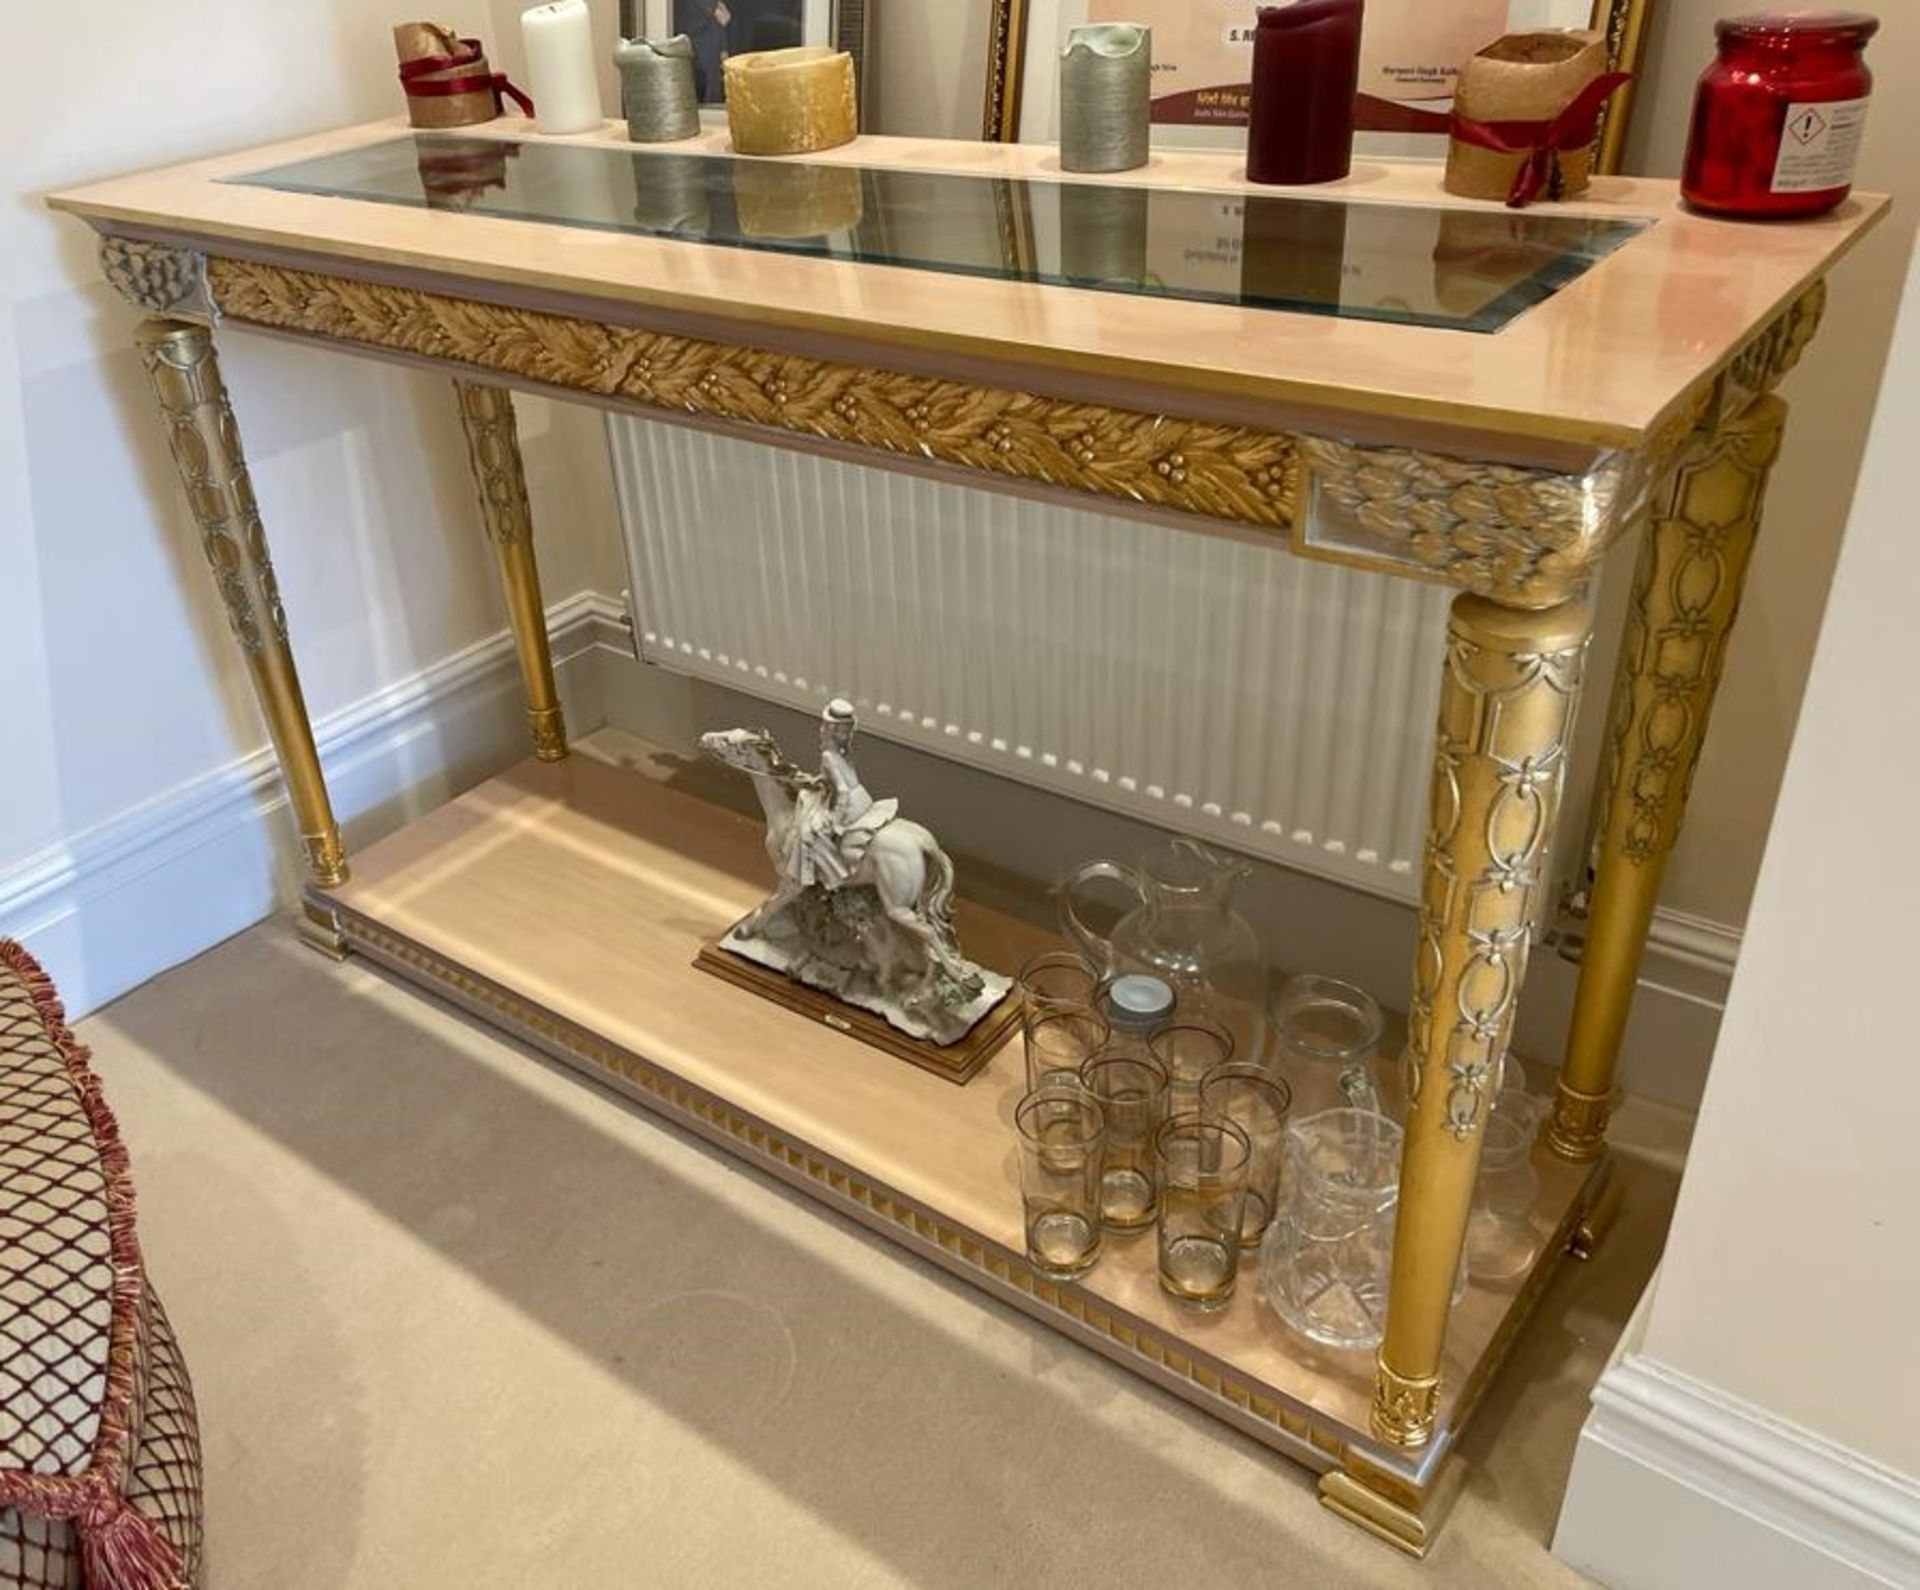 1 x Hand Carved Ornate Console Table Complimented With Birchwood Veneer, Golden Pillar Legs, - Image 8 of 10